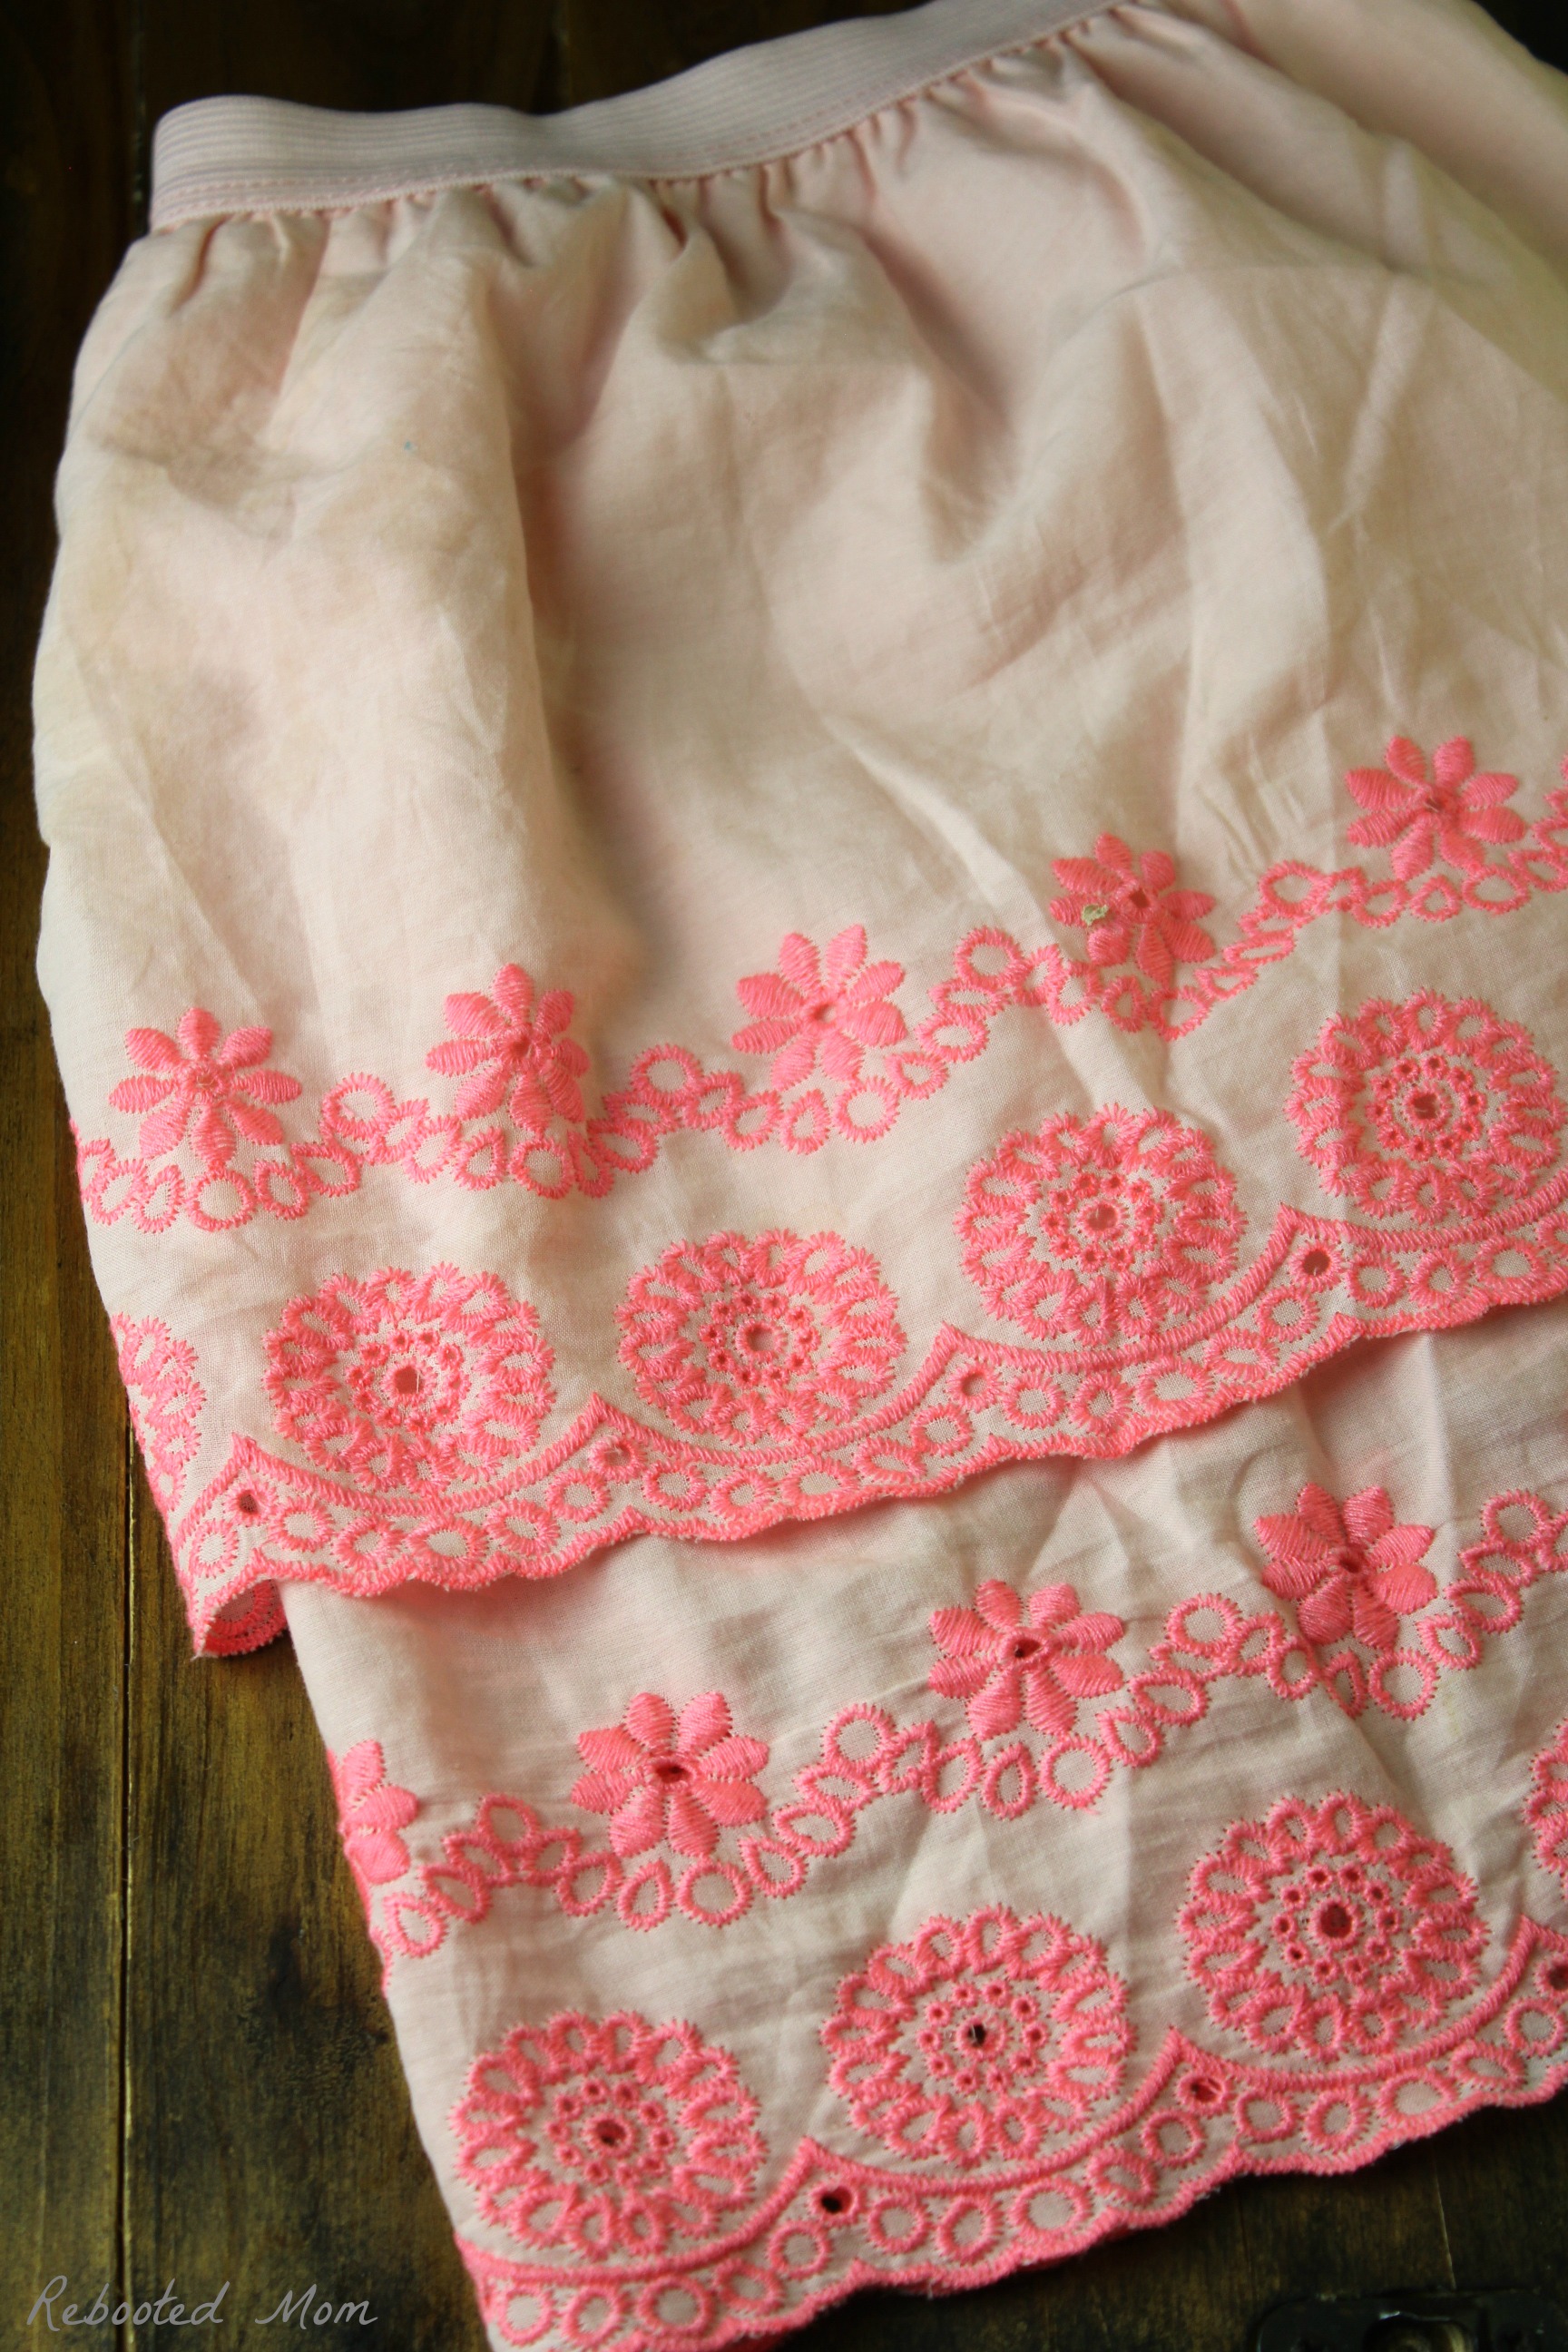 If you have little girls, this ruffle fabric skirt is a simple way to sew up something cute and adorable in just a few minutes! 